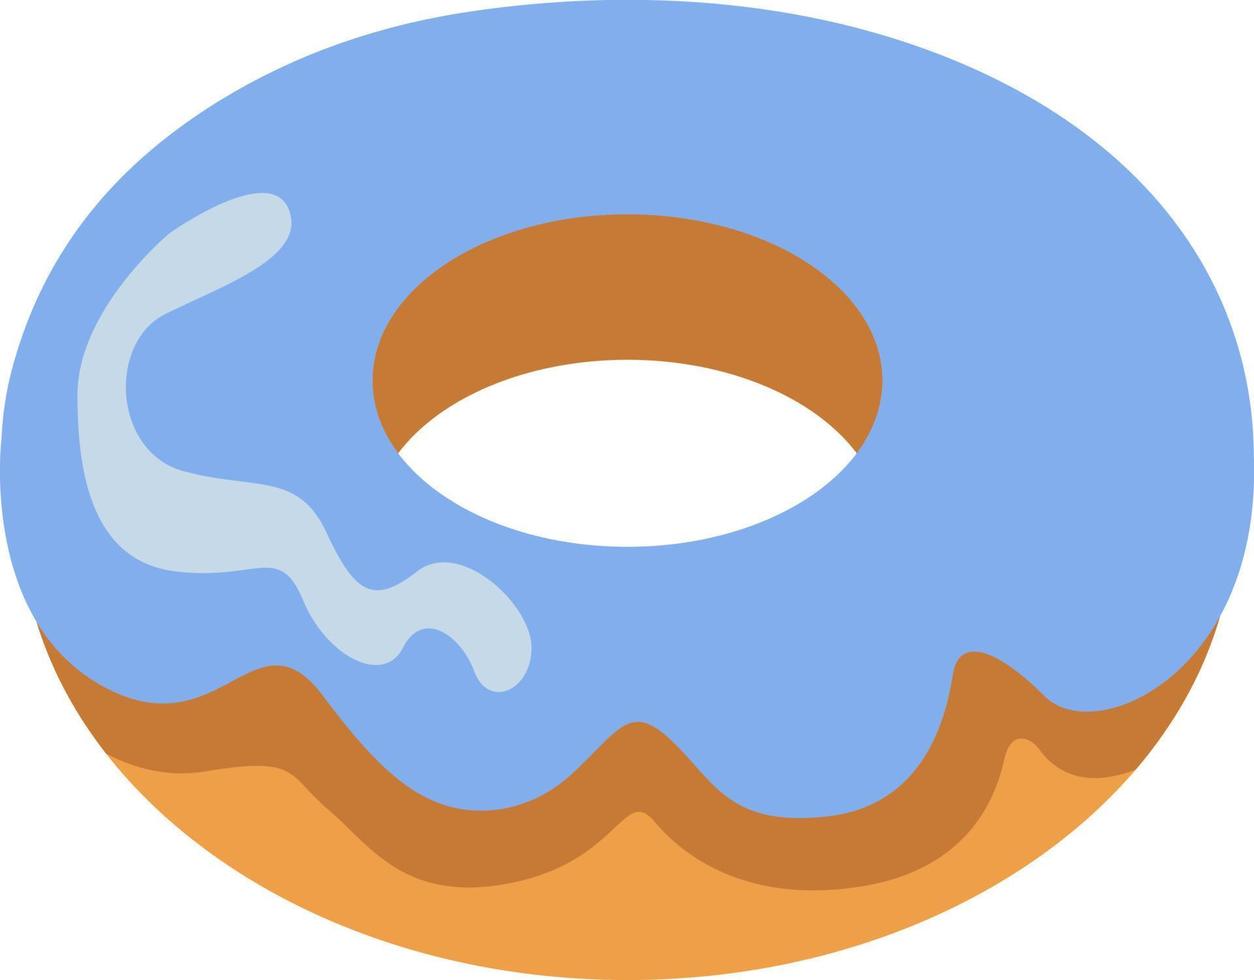 Donut with blue glaze, illustration, vector on a white background